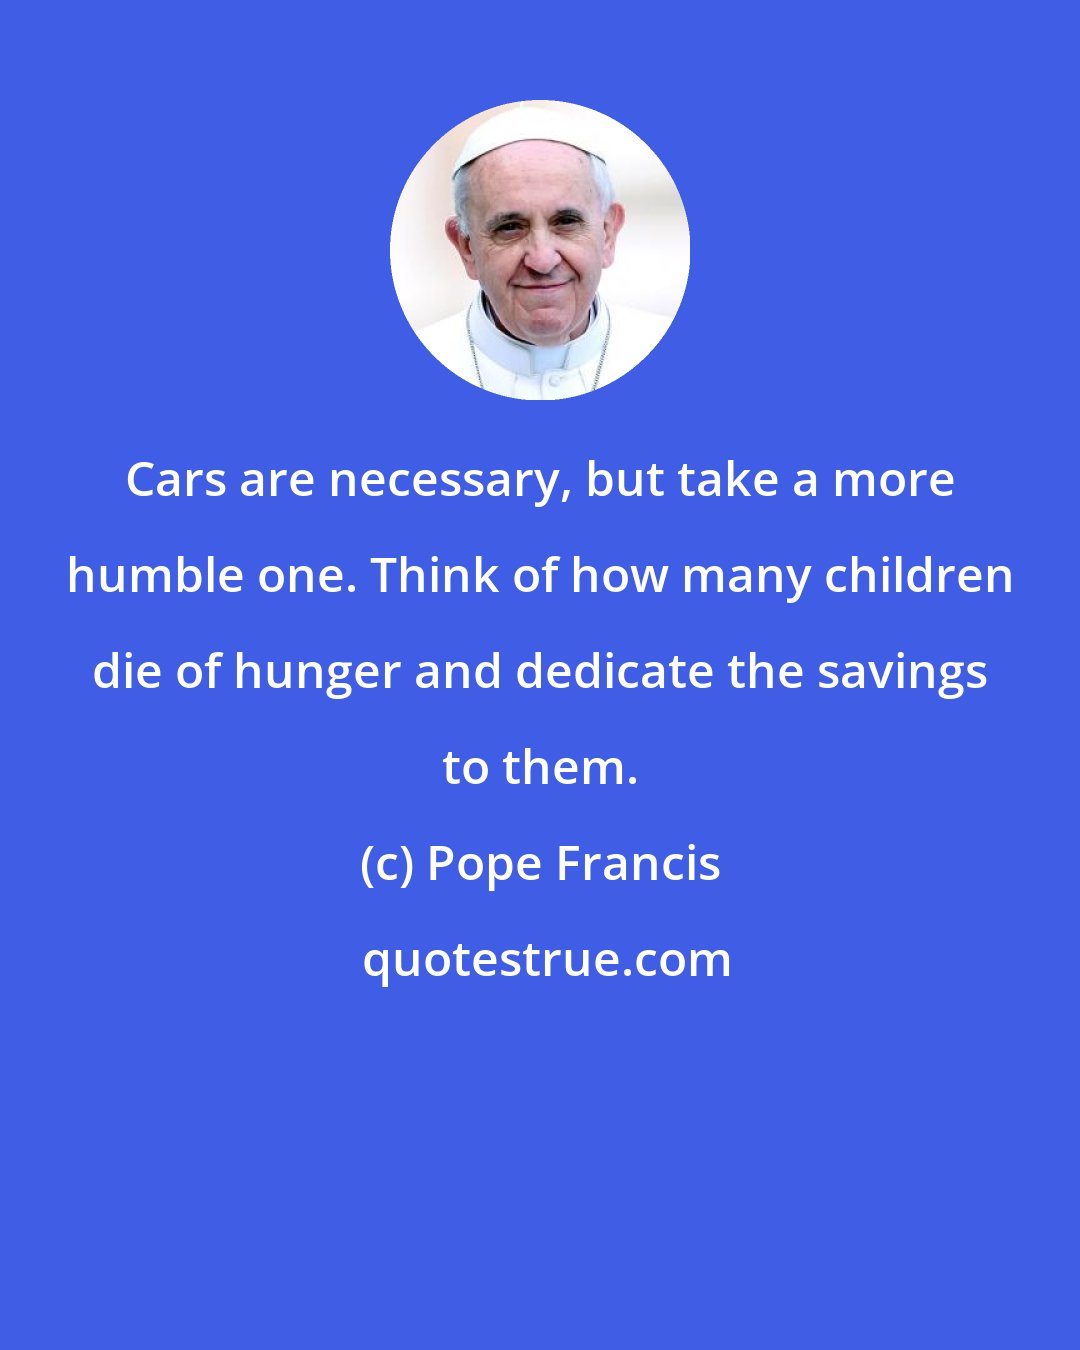 Pope Francis: Cars are necessary, but take a more humble one. Think of how many children die of hunger and dedicate the savings to them.